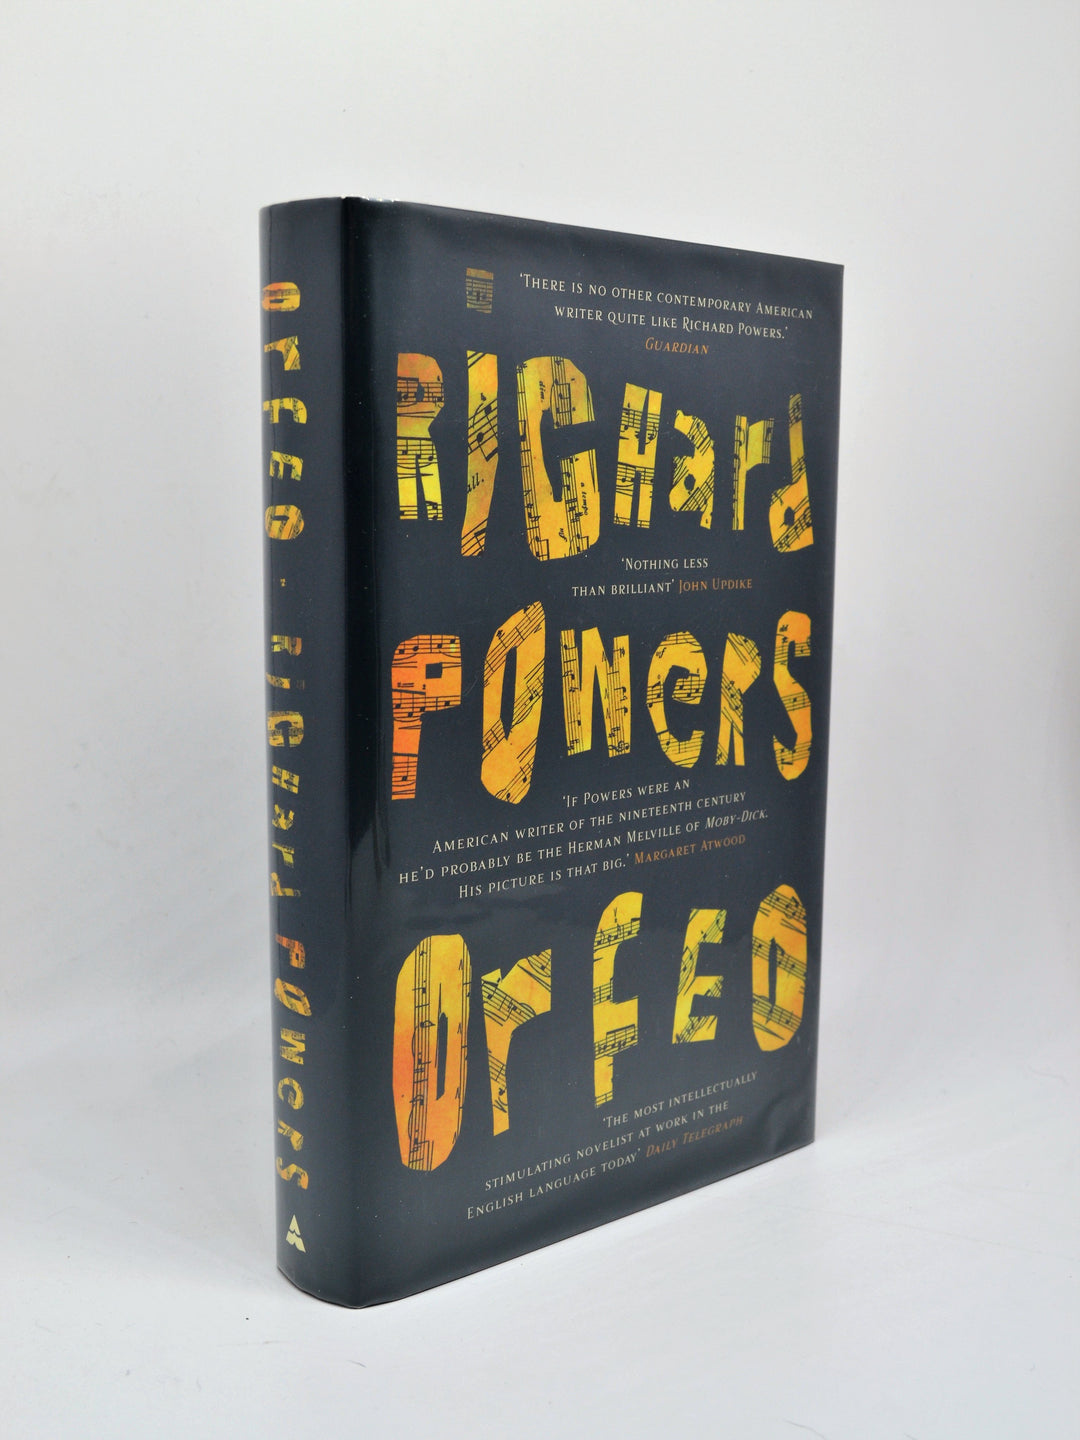 Powers, Richard - Orfeo - SIGNED | back cover